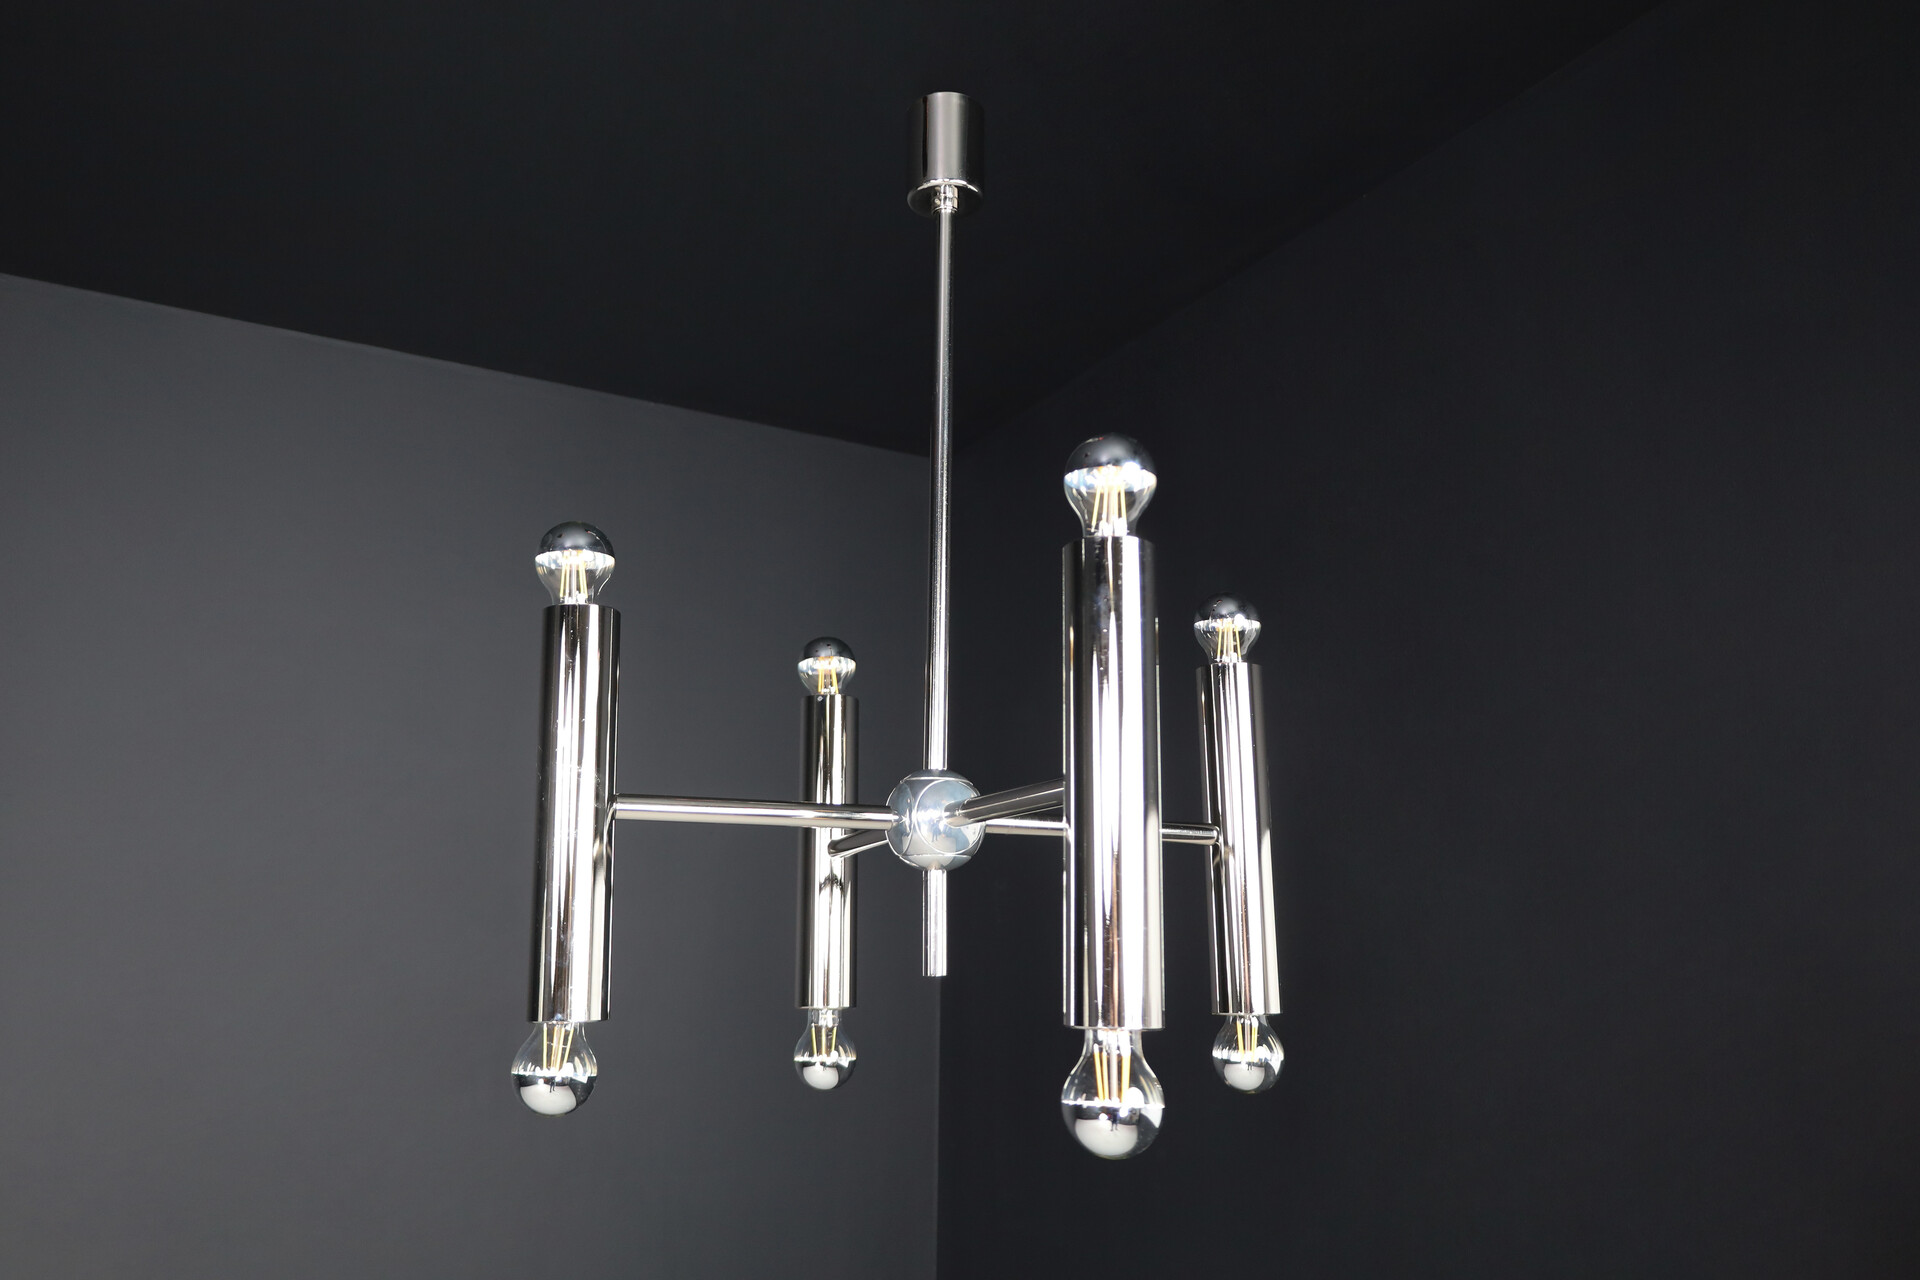 Mid century modern Chandelier in polished steel with Eight lights, Germany 1960 Mid-20th century